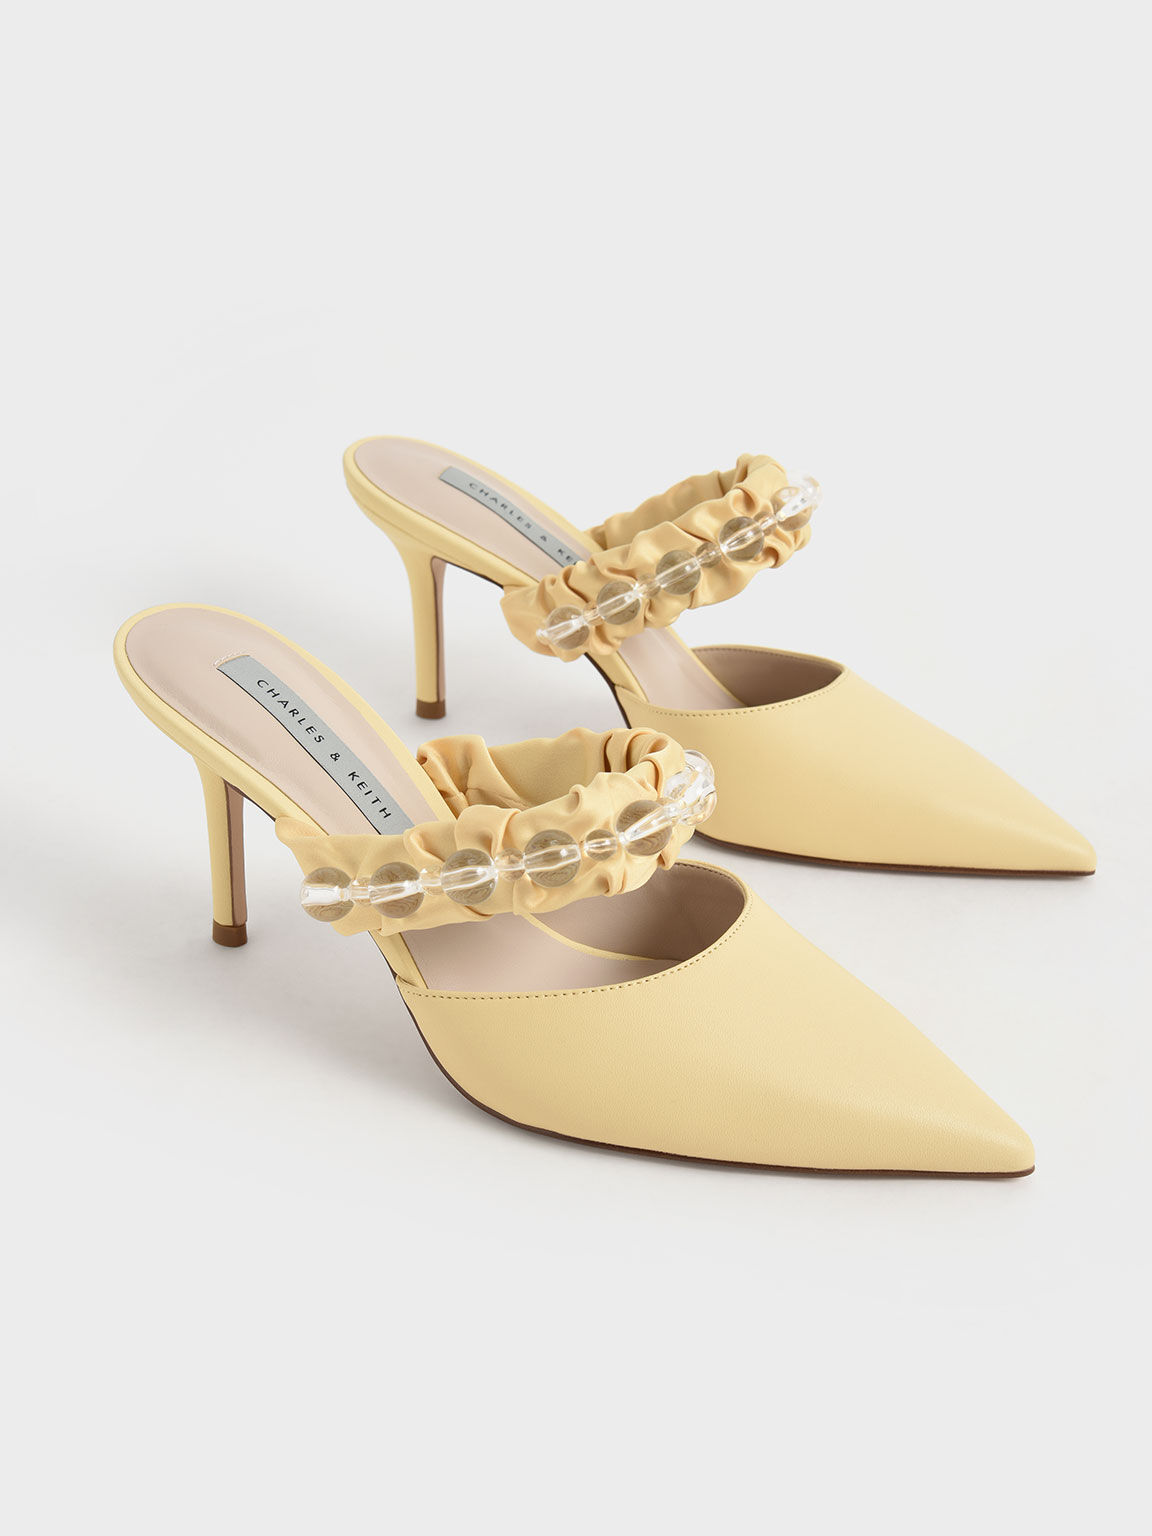 Ruched Satin Strap Mules, Yellow, hi-res